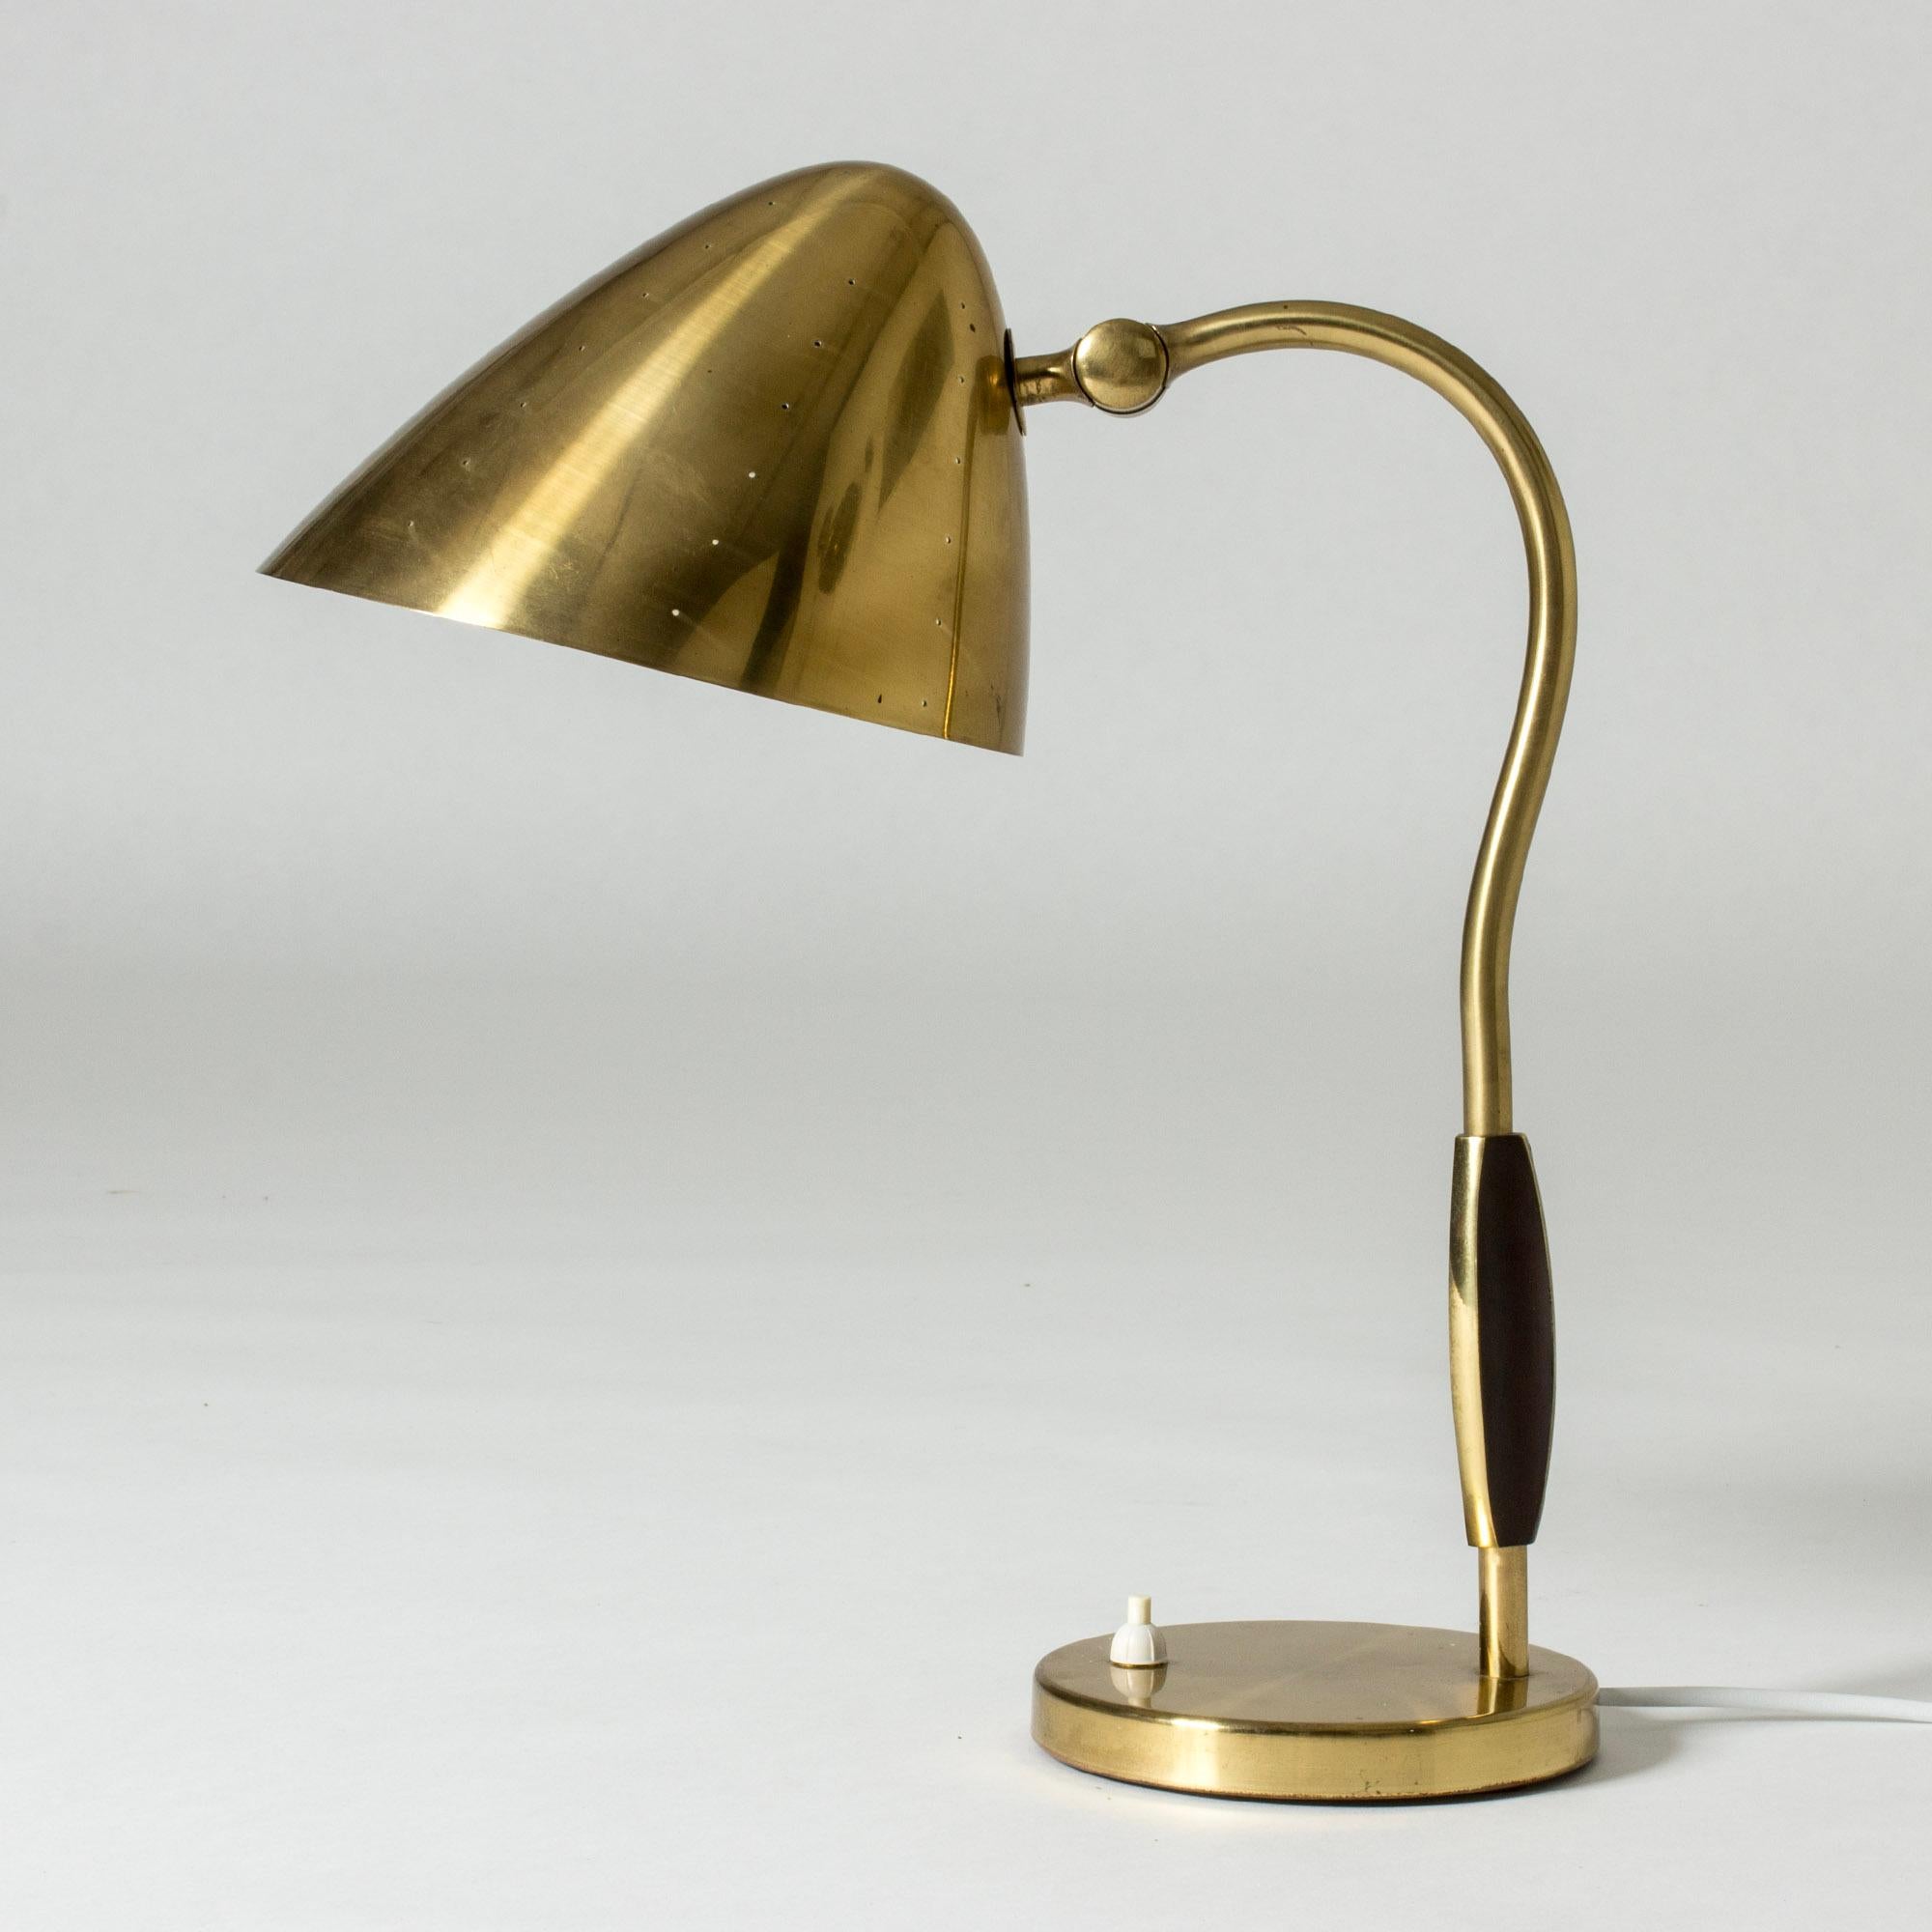 Elegant table or desk lamp from Boréns, made entirely from brass. Sculpted brass handle, shade perforated with small holes.